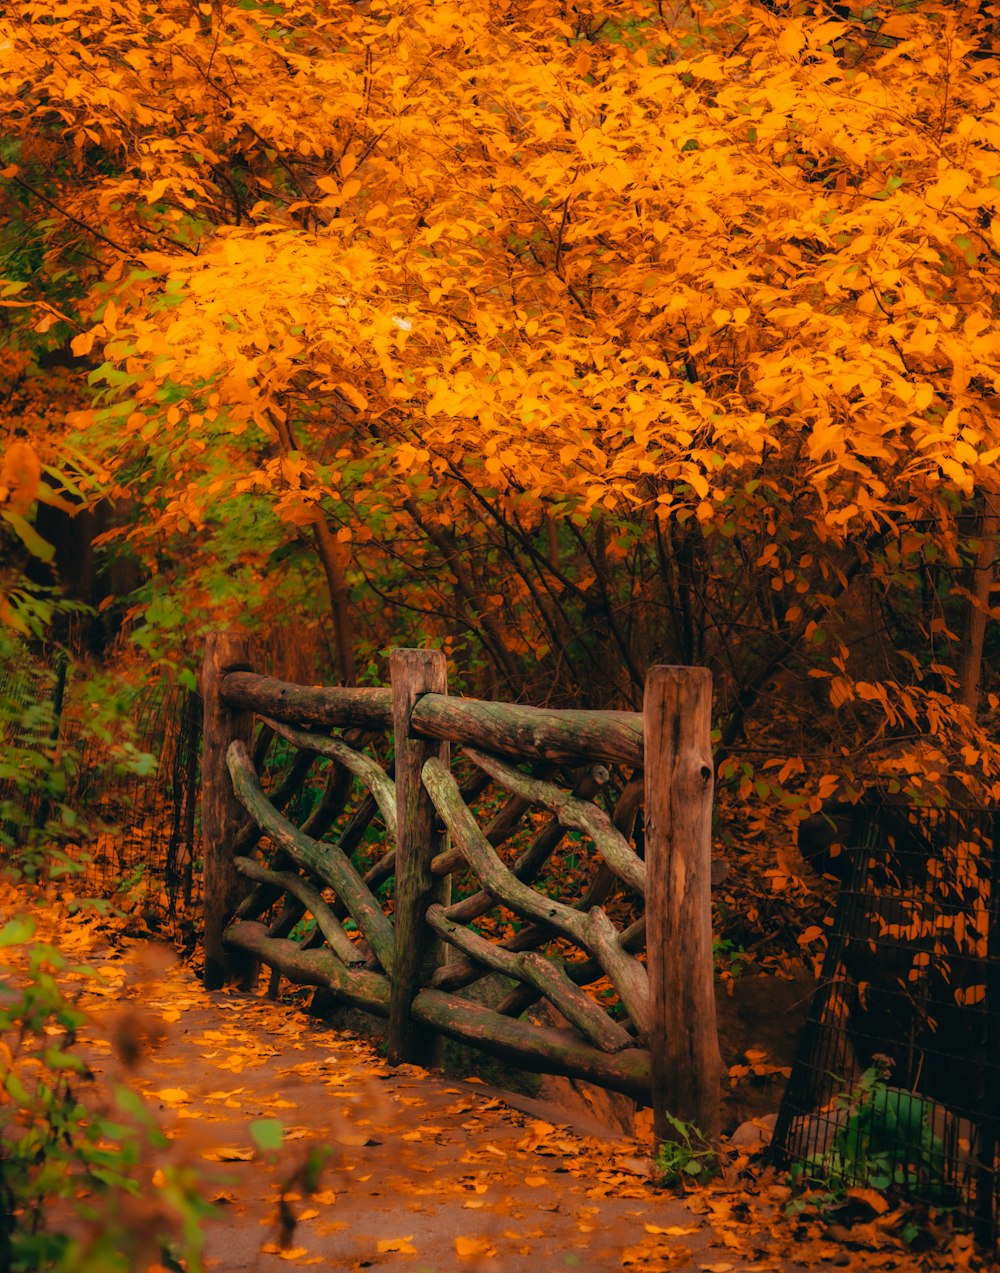 a wooden fence with yellow leaves